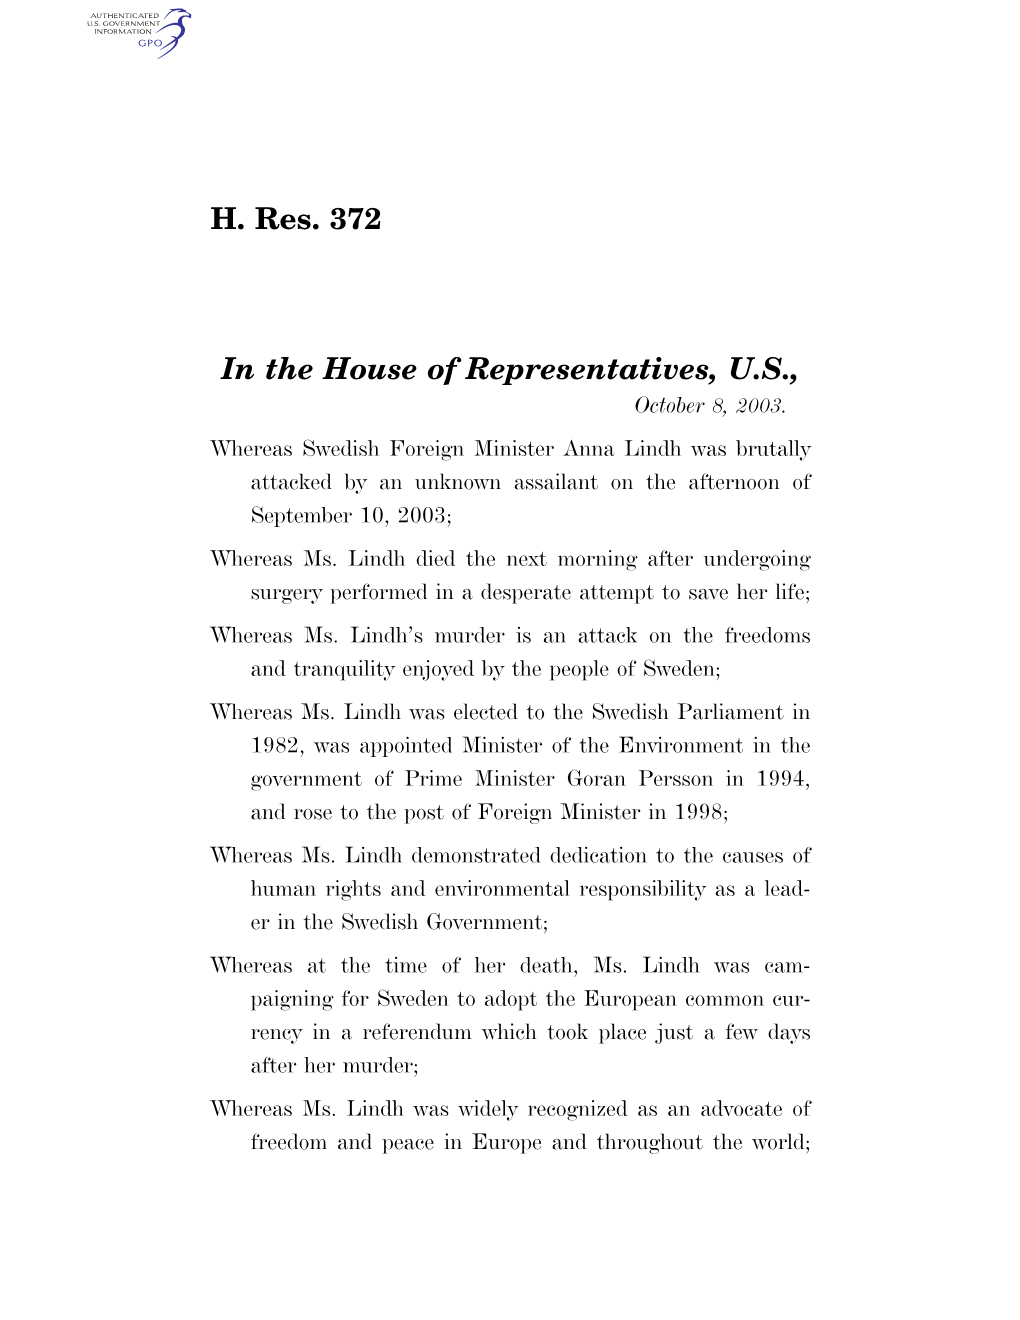 H. Res. 372 in the House of Representatives, U.S